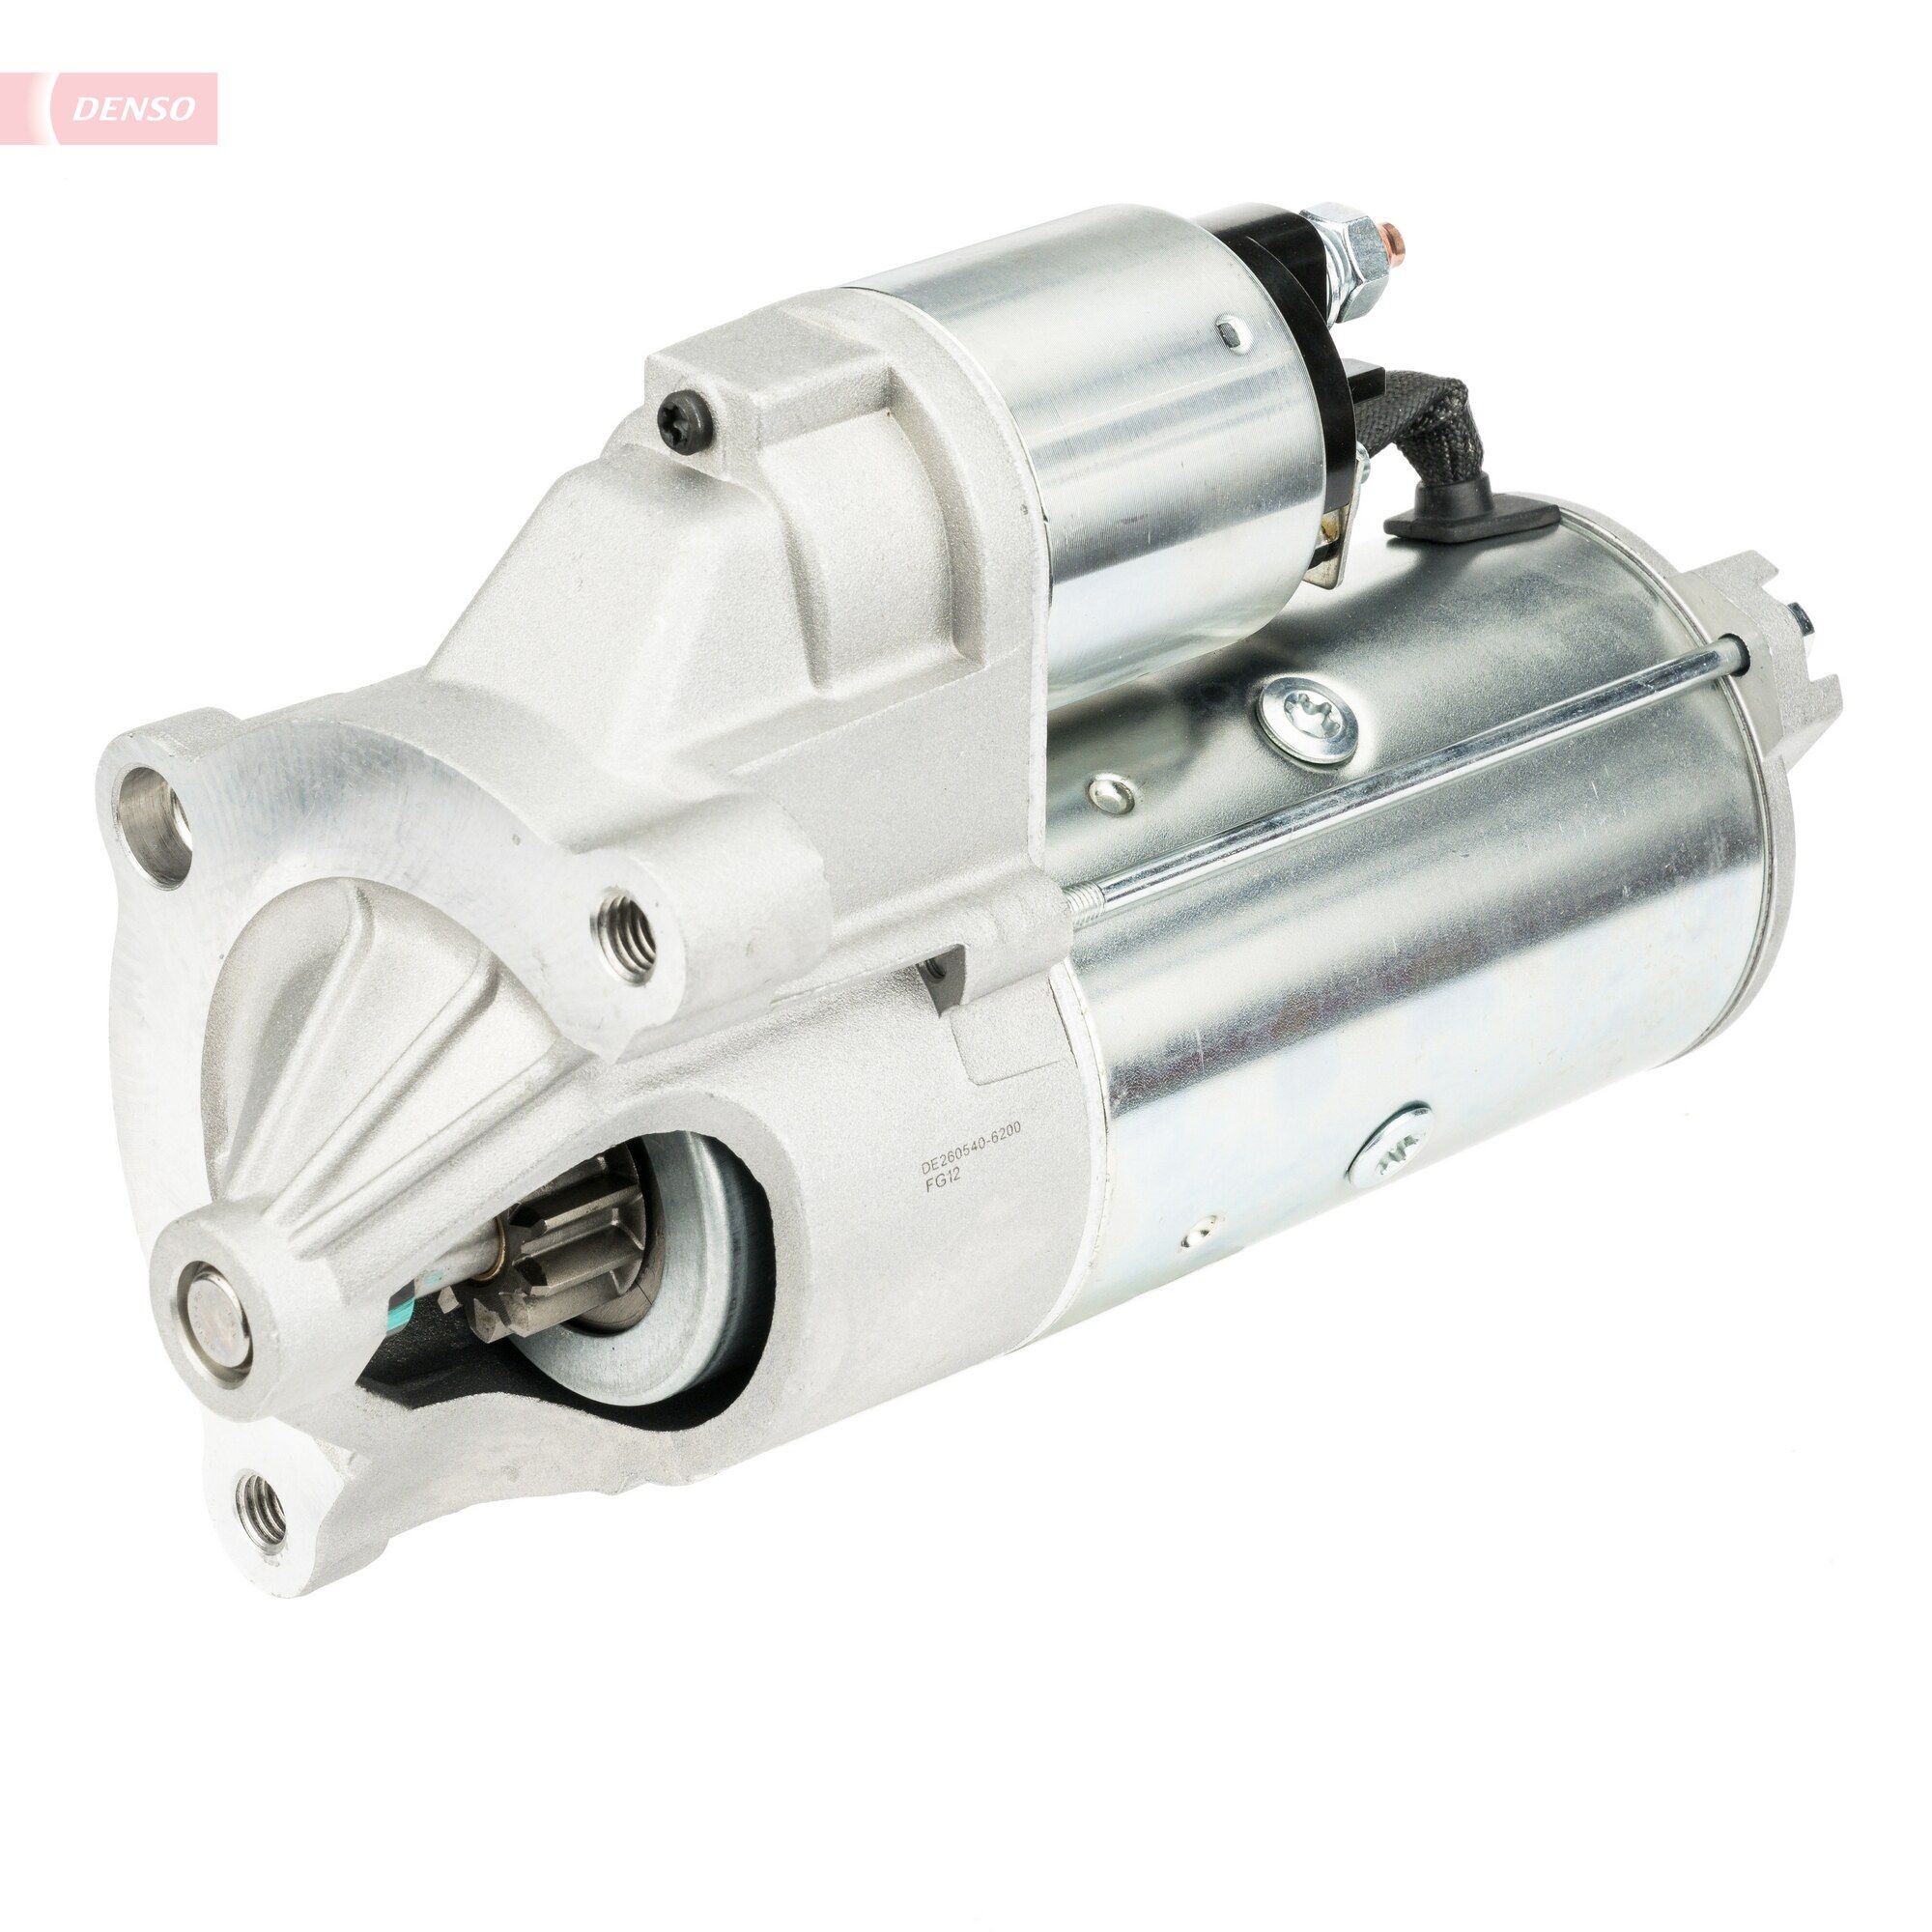 Original DSN3040 DENSO Starter experience and price